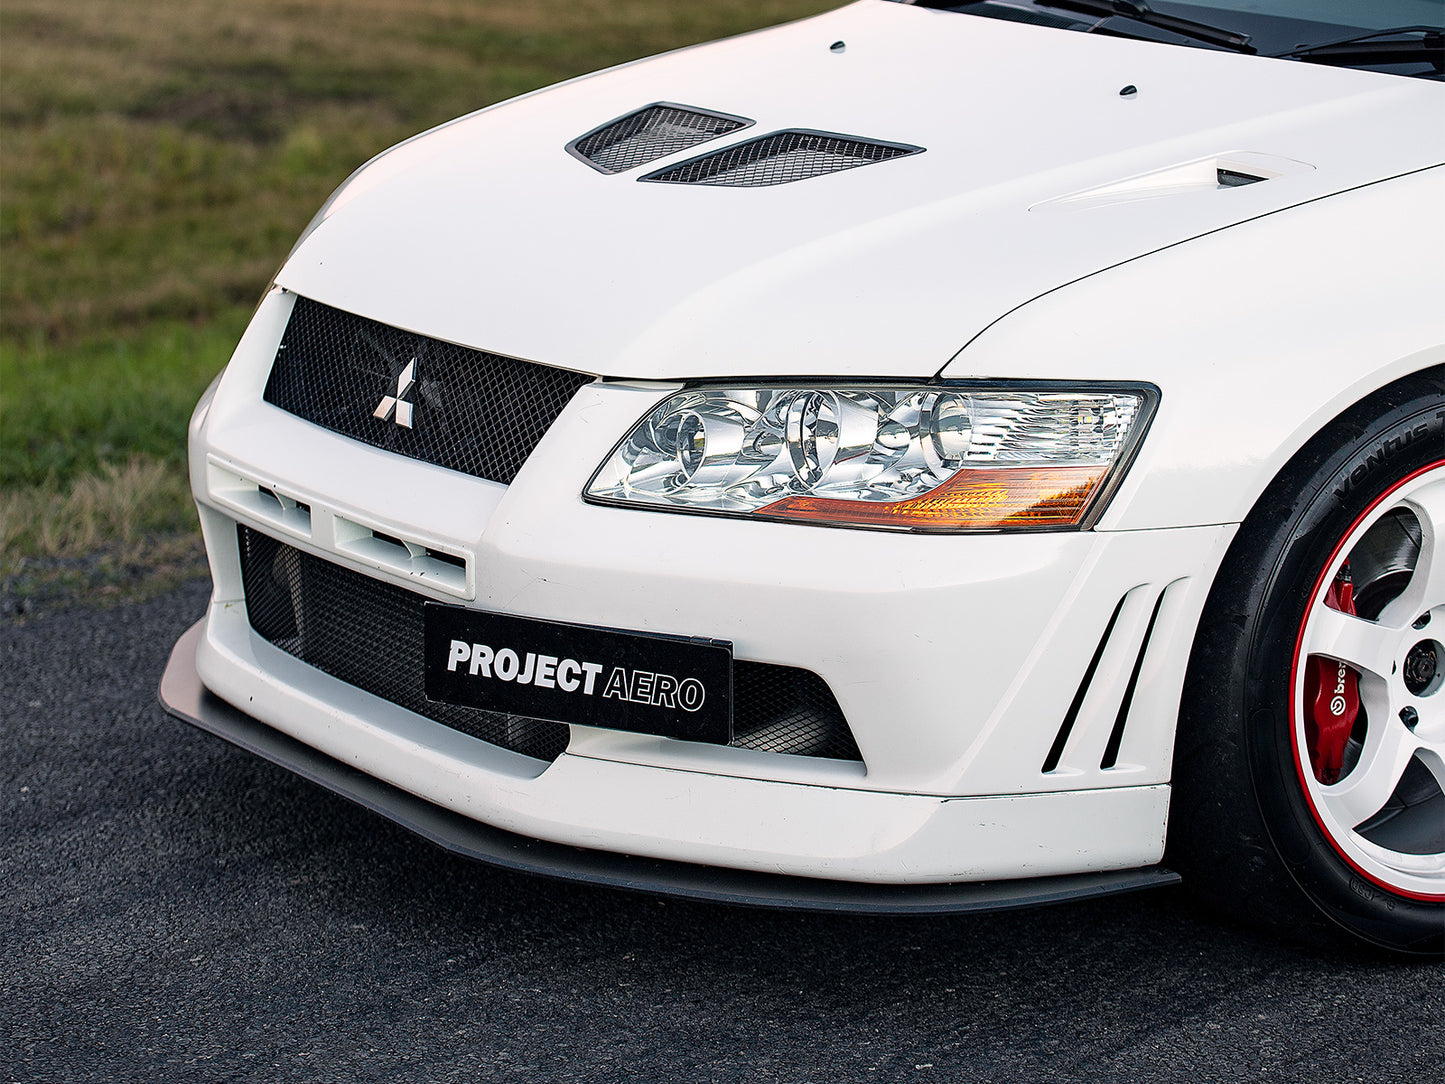 Evo 7 Front Splitter Lip is the perfect aftermarket lip for any Evo 7, complimenting the original front bumper for a sleek refreshed look